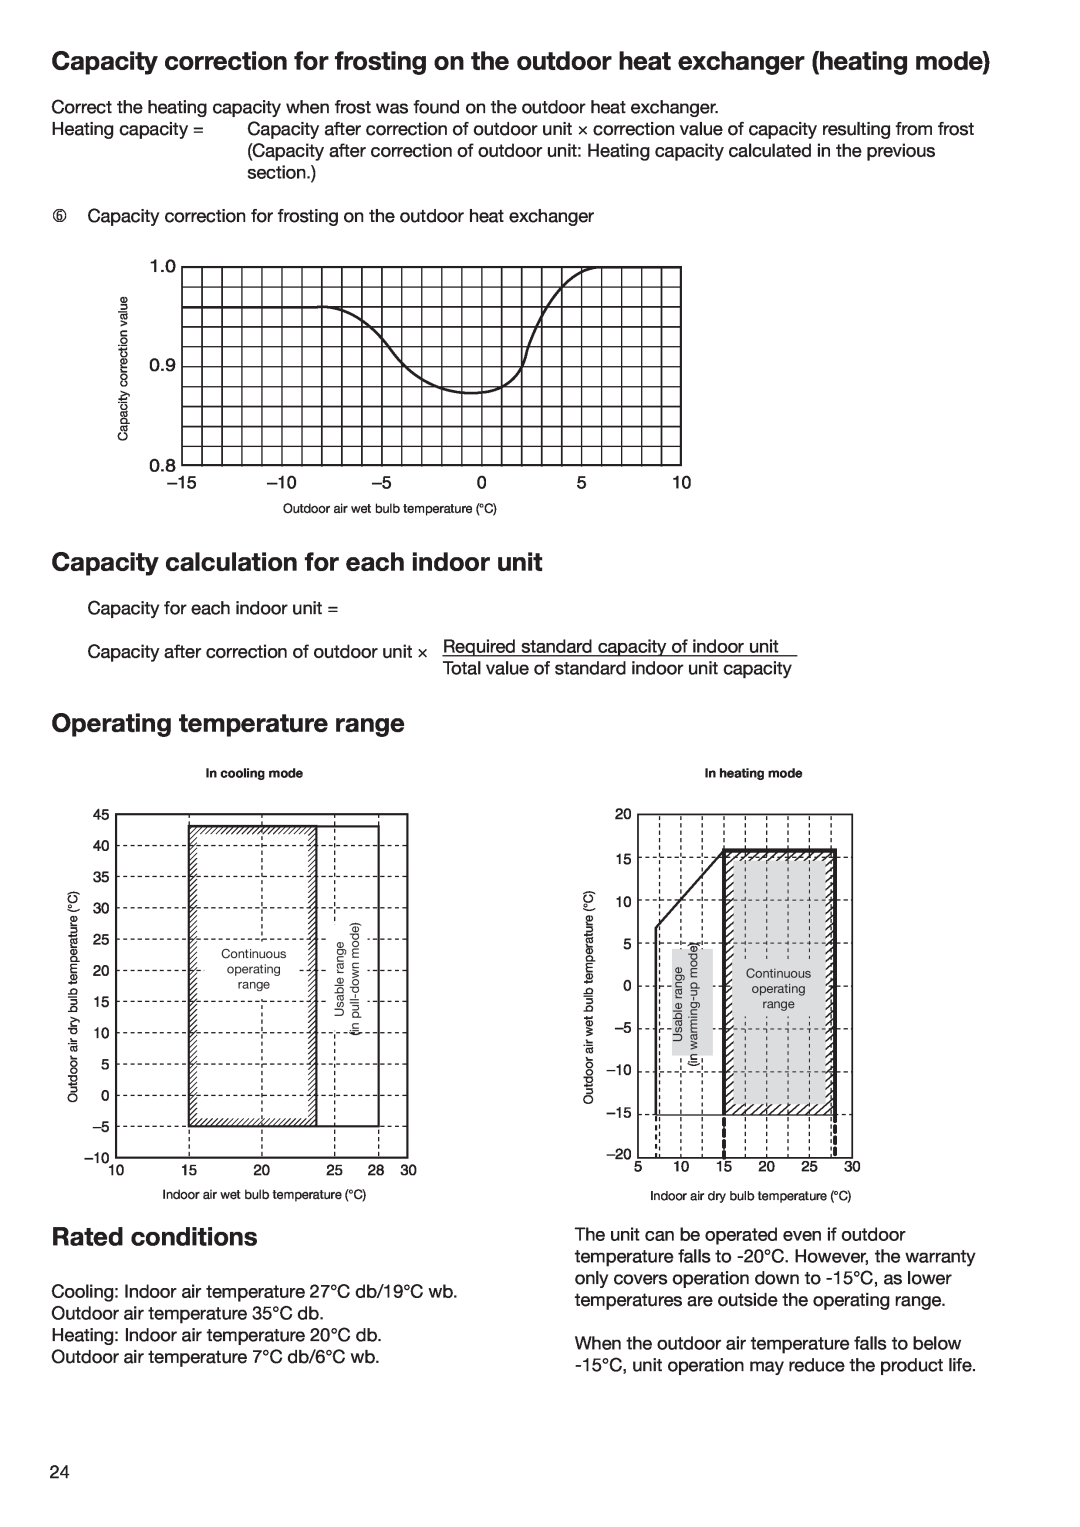 Toshiba HFC R-410A manual Capacity calculation for each indoor unit, Operating temperature range, Rated conditions 